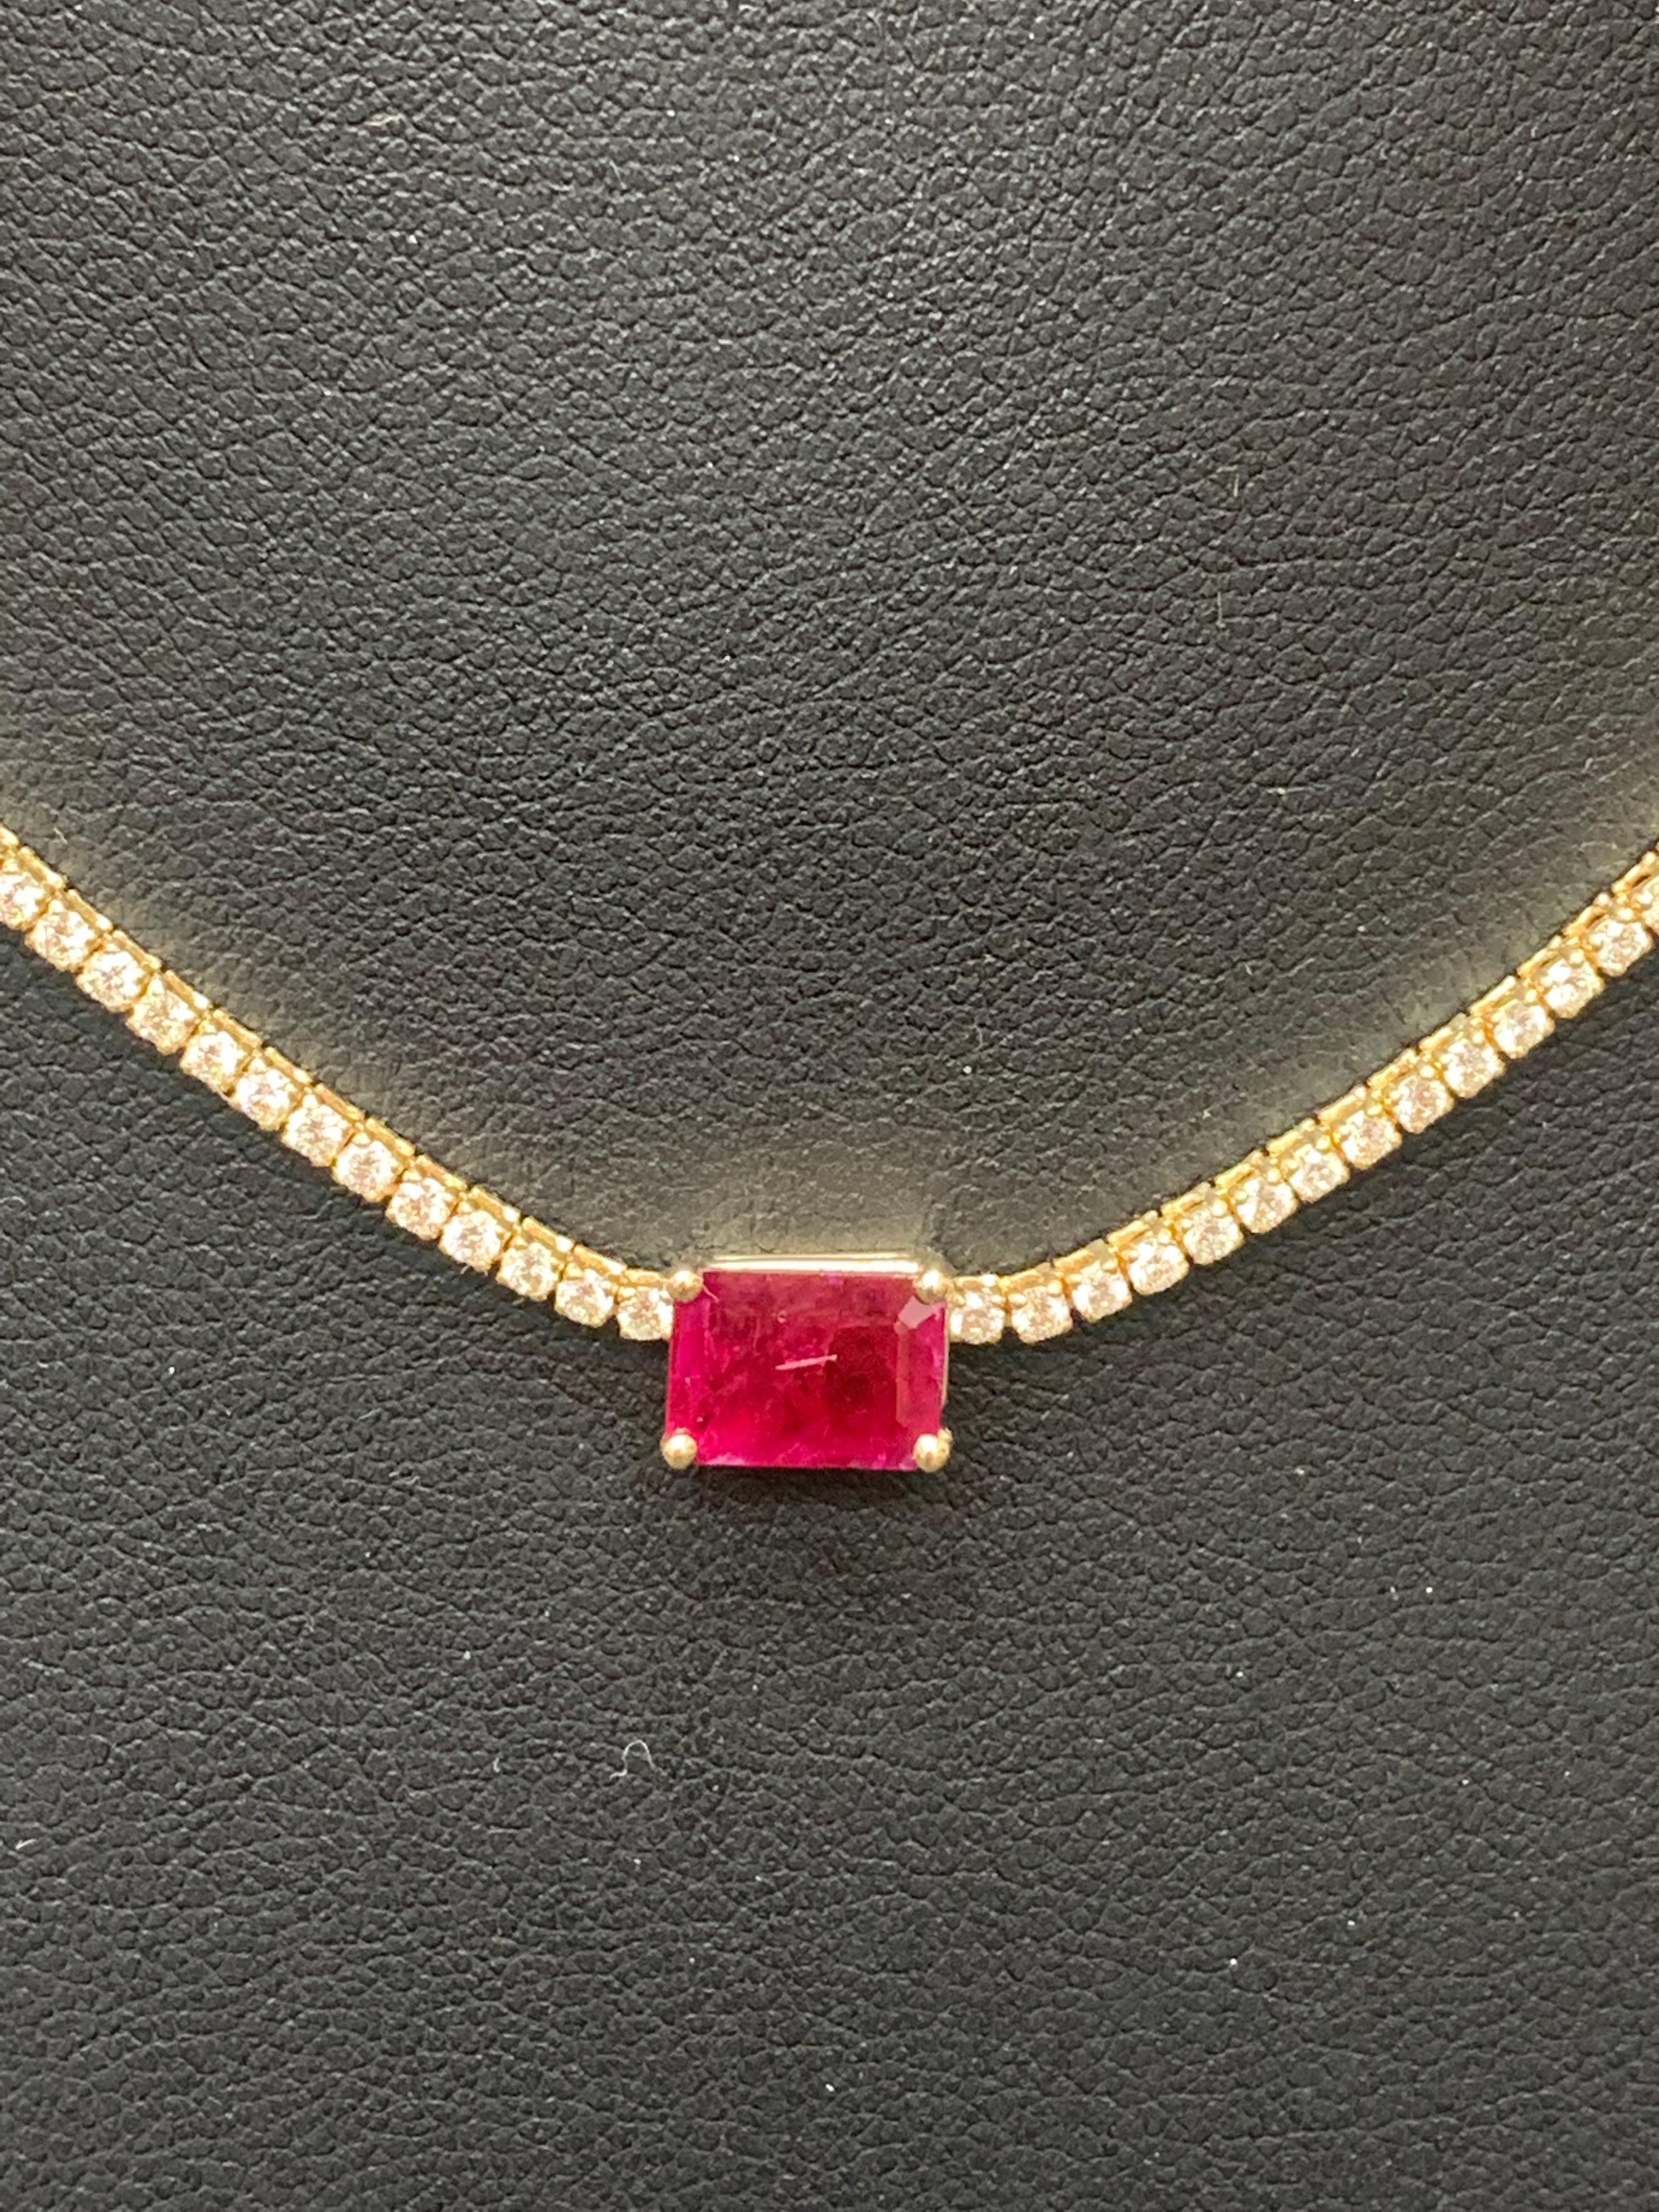 A brilliant and classic piece showcasing emerald cut red ruby in the center weighing 1.49 carats and a line of round diamonds on both sides set in 14K White Gold. 239 diamonds in this necklace are brilliant round cut and weigh 3.01 carats in total.